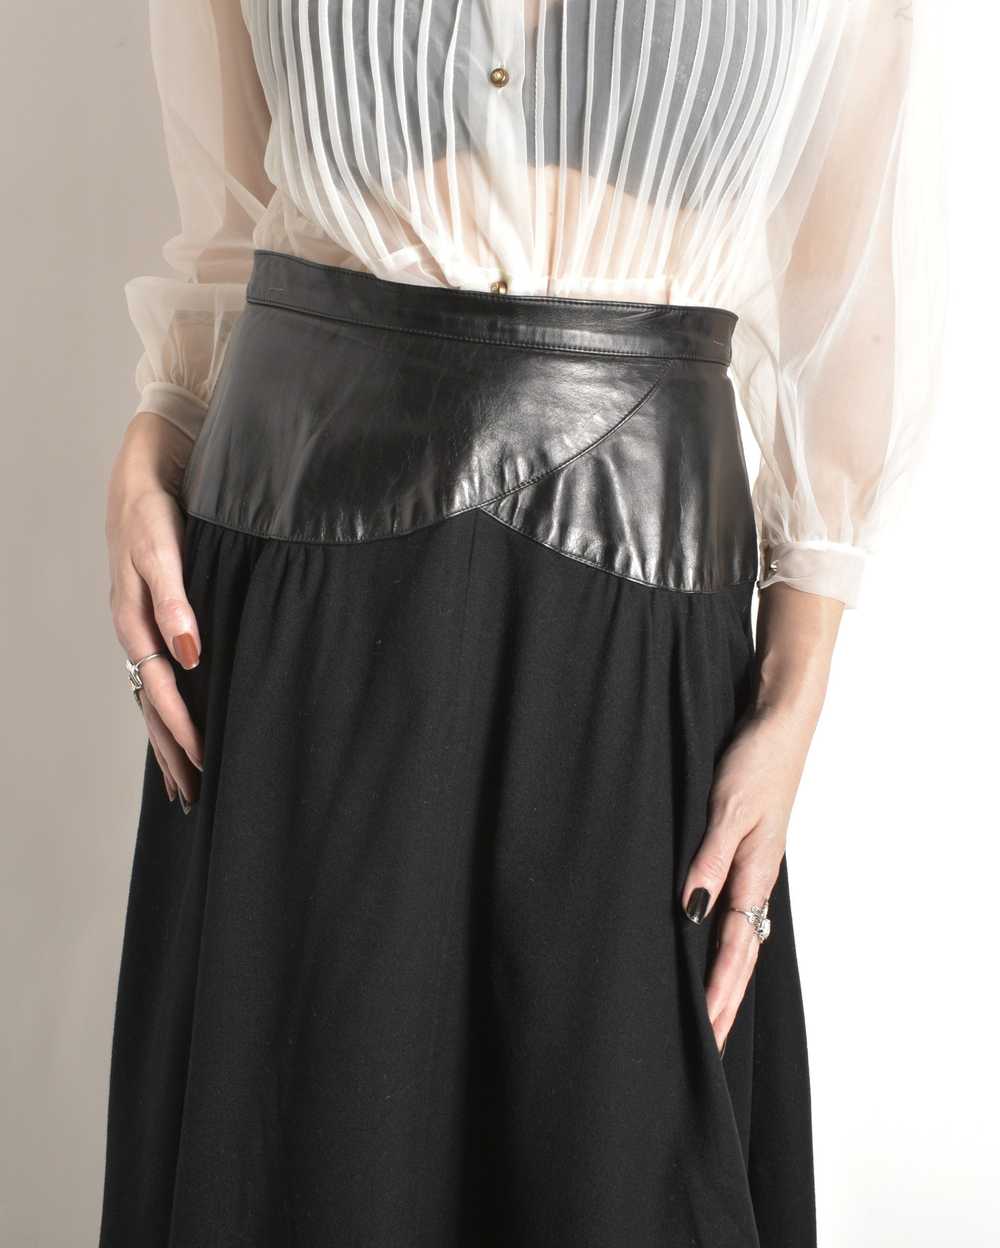 1980s Wool and Leather Skirt-small - image 4